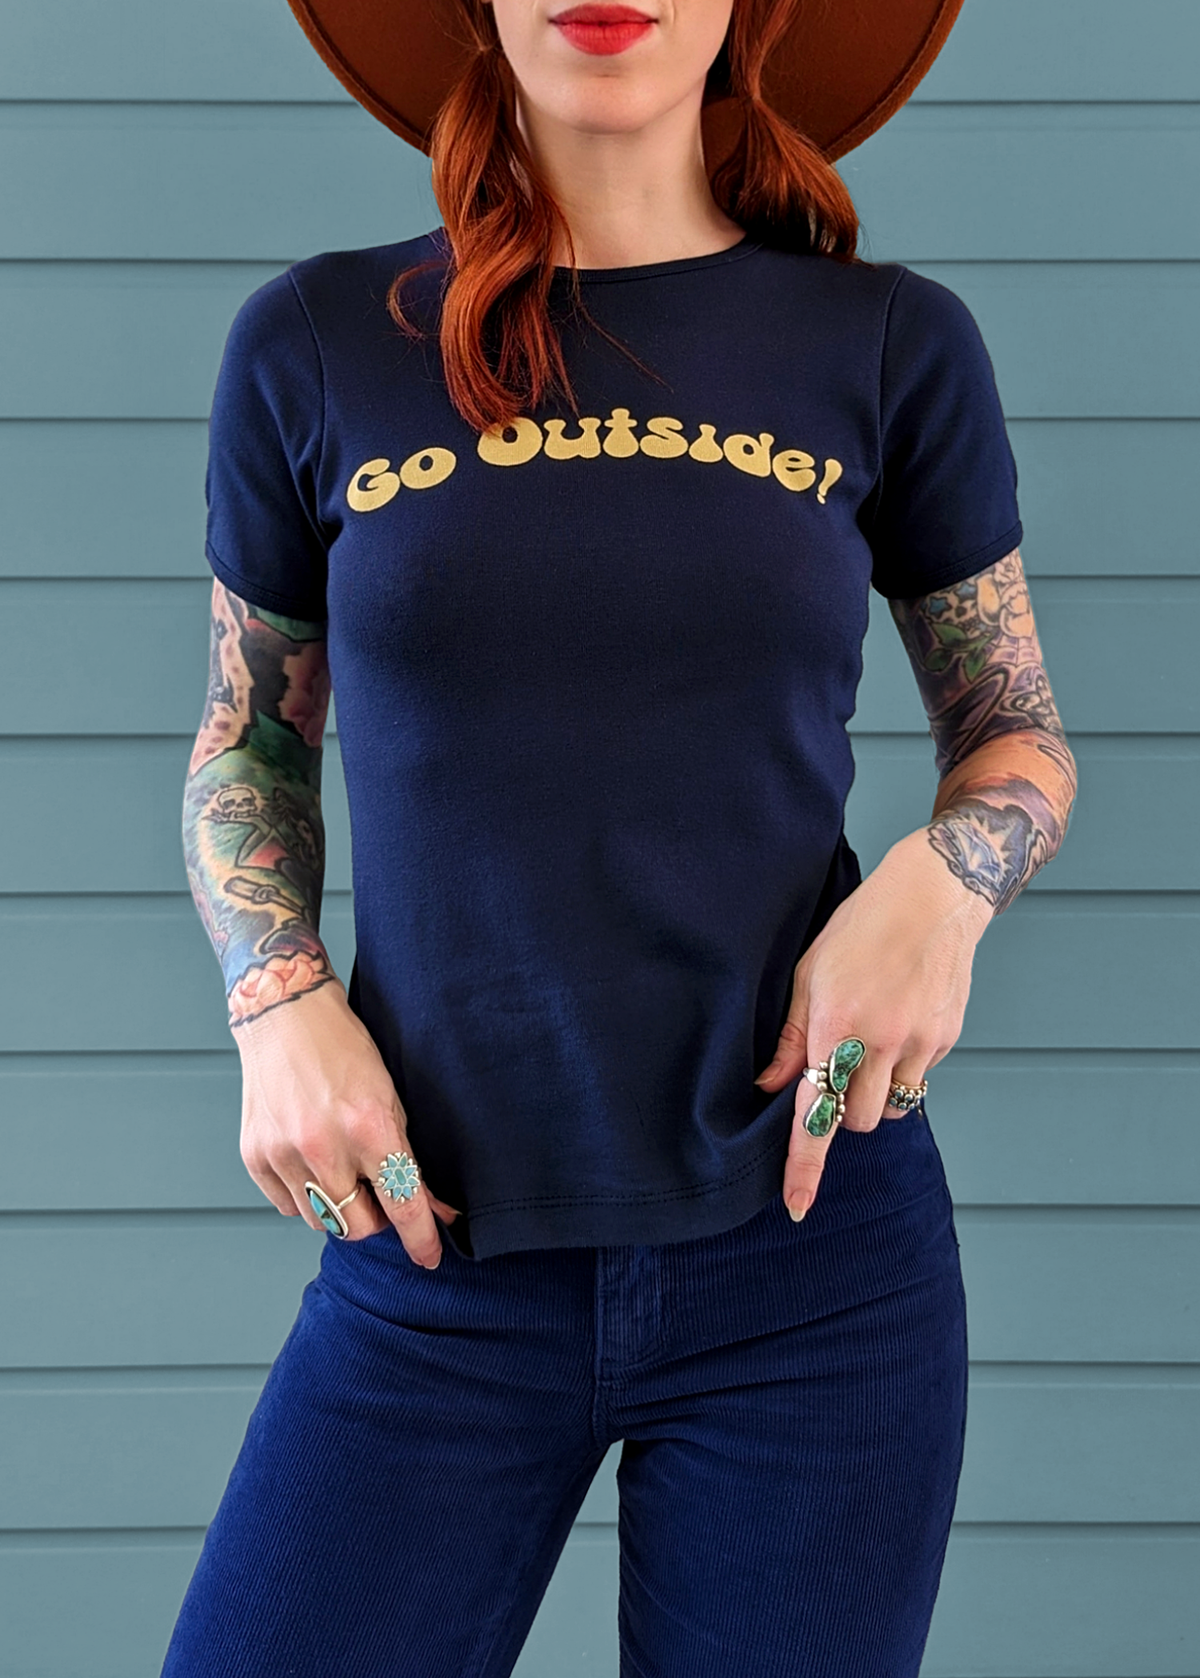 70s inspired Rib Ringer Tee in Navy with "Go Outside" graphics in yellow at front, by Rolla's Jeans